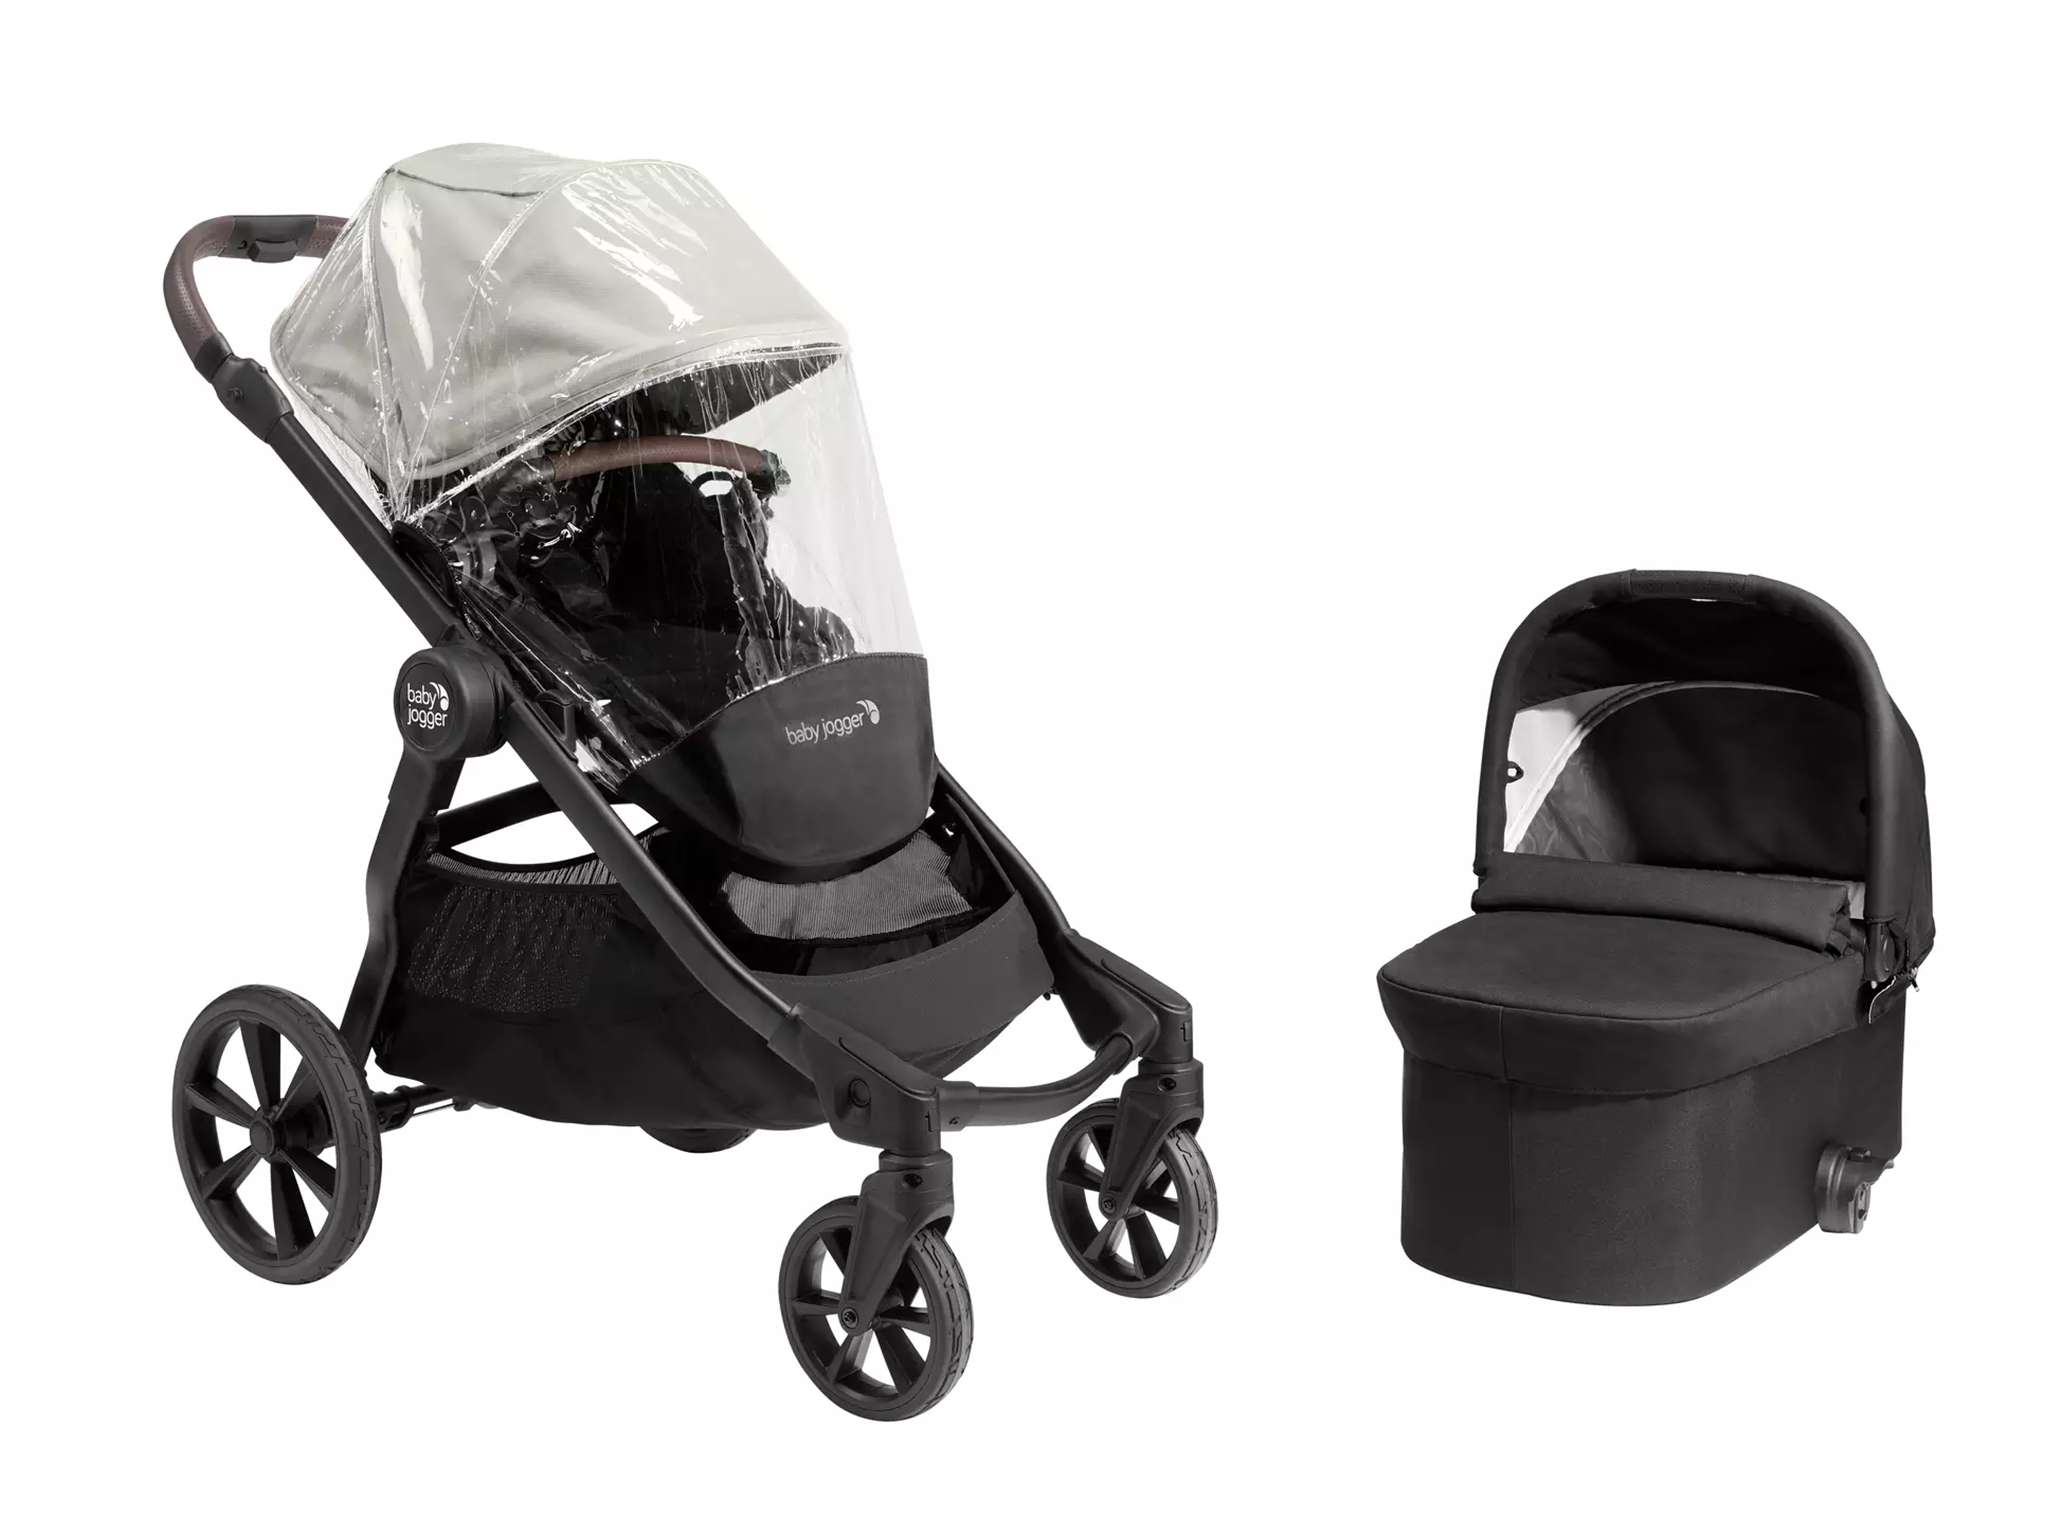 The city select 2 is sturdy as well as being travel-system compatible